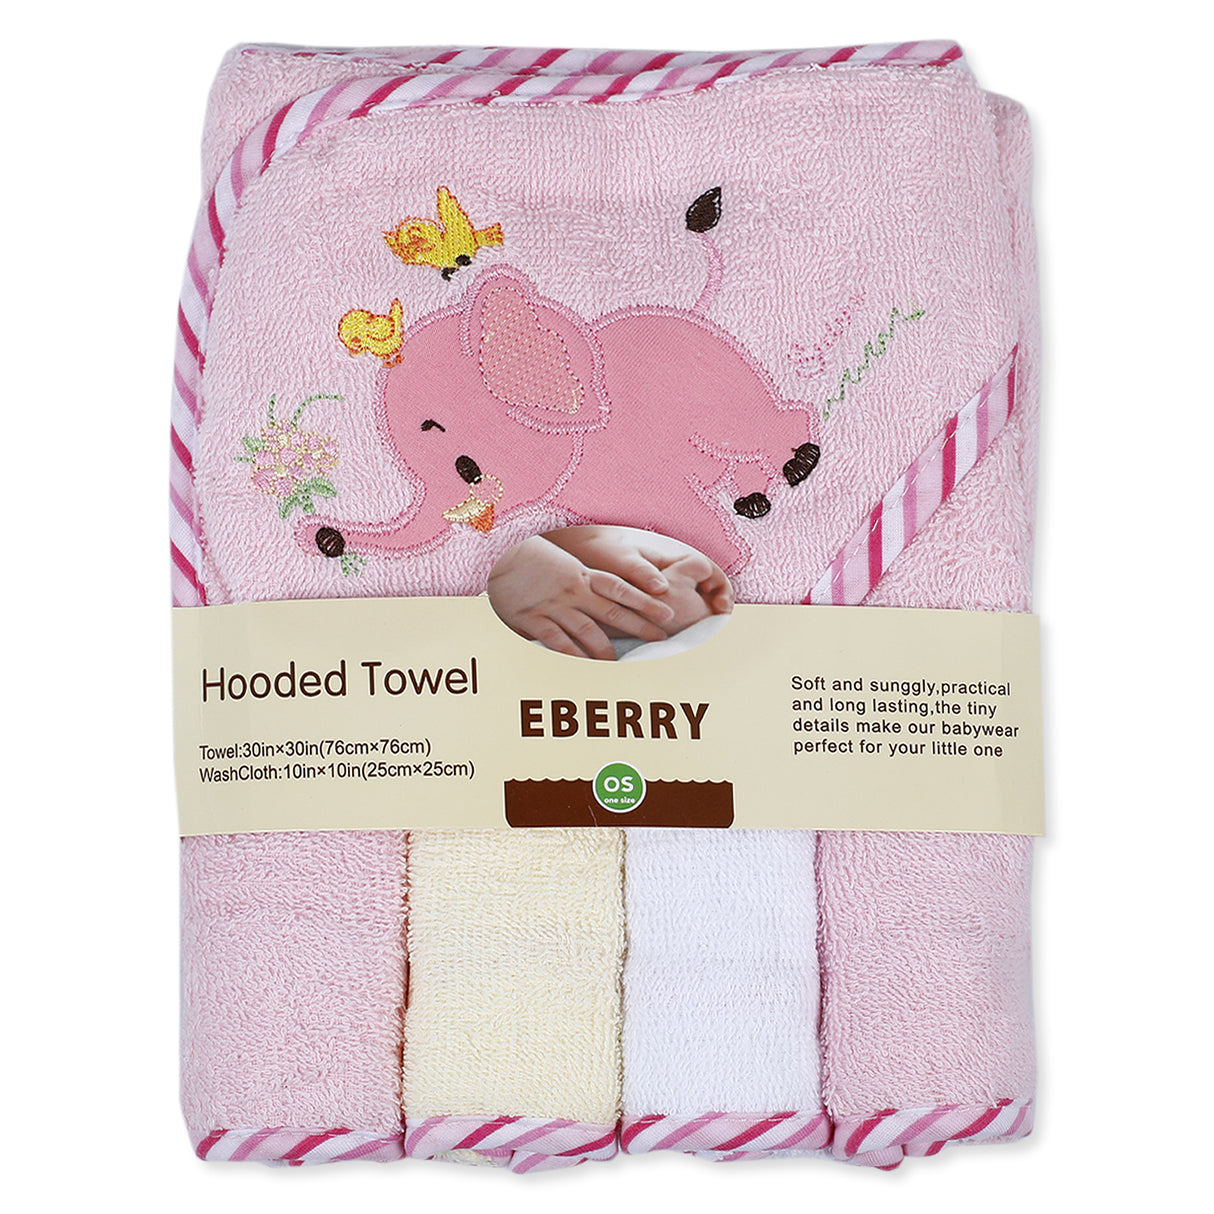 Eberry Elephant Soft And Cozy Hooded Towel